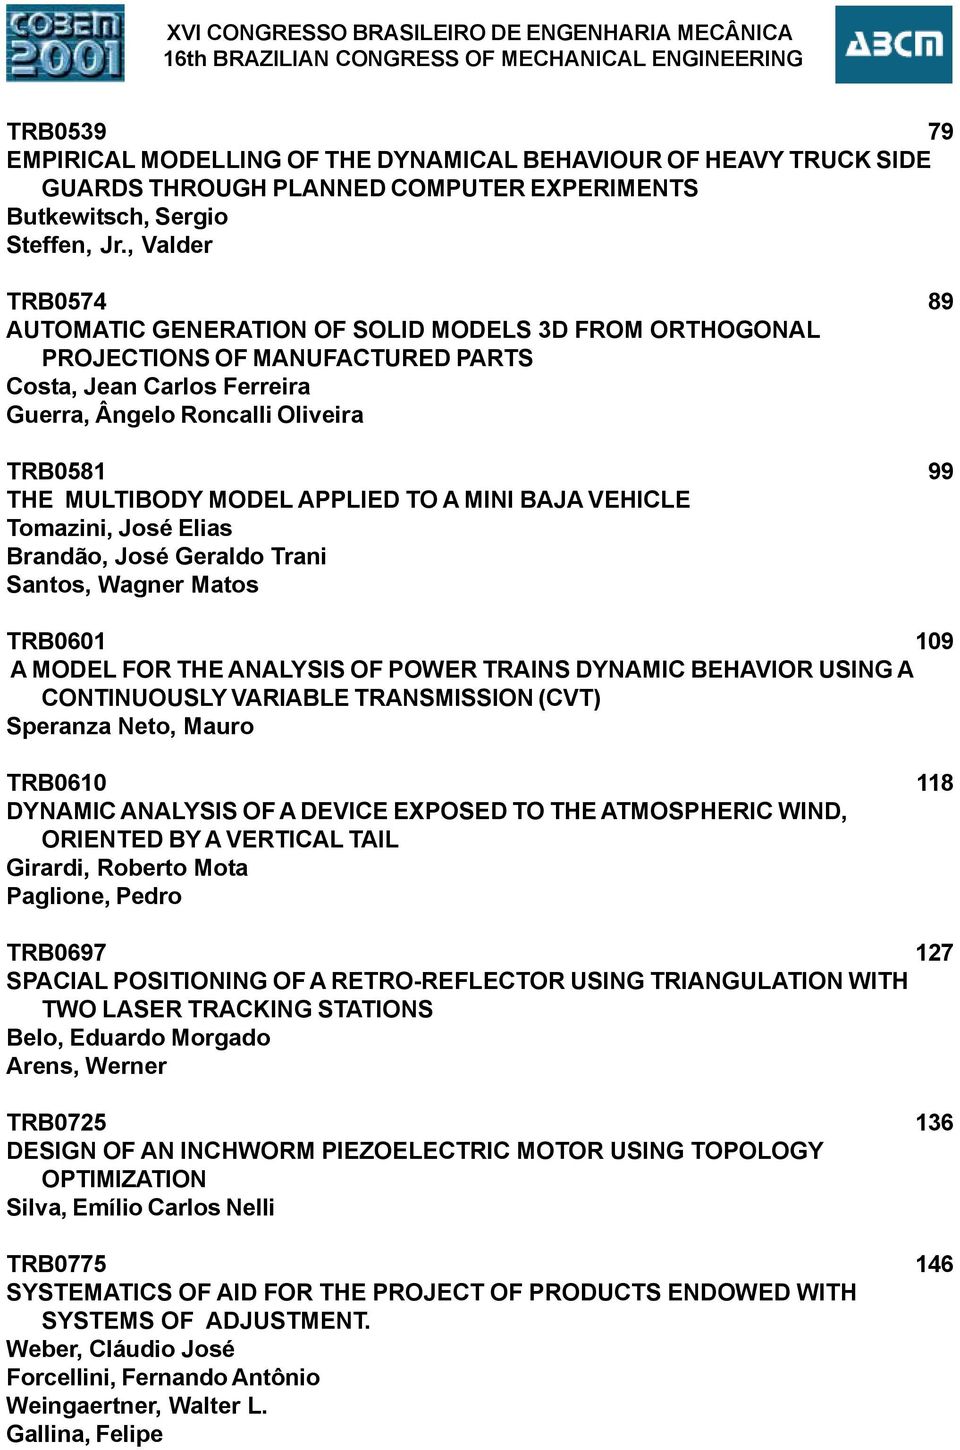 , Valder TRB574 89 AUTOMATIC GENERATION OF SOLID MODELS 3D FROM ORTHOGONAL PROJECTIONS OF MANUFACTURED PARTS Costa, Jean Carlos Ferreira Guerra, Ângelo Roncalli Oliveira TRB581 99 THE MULTIBODY MODEL